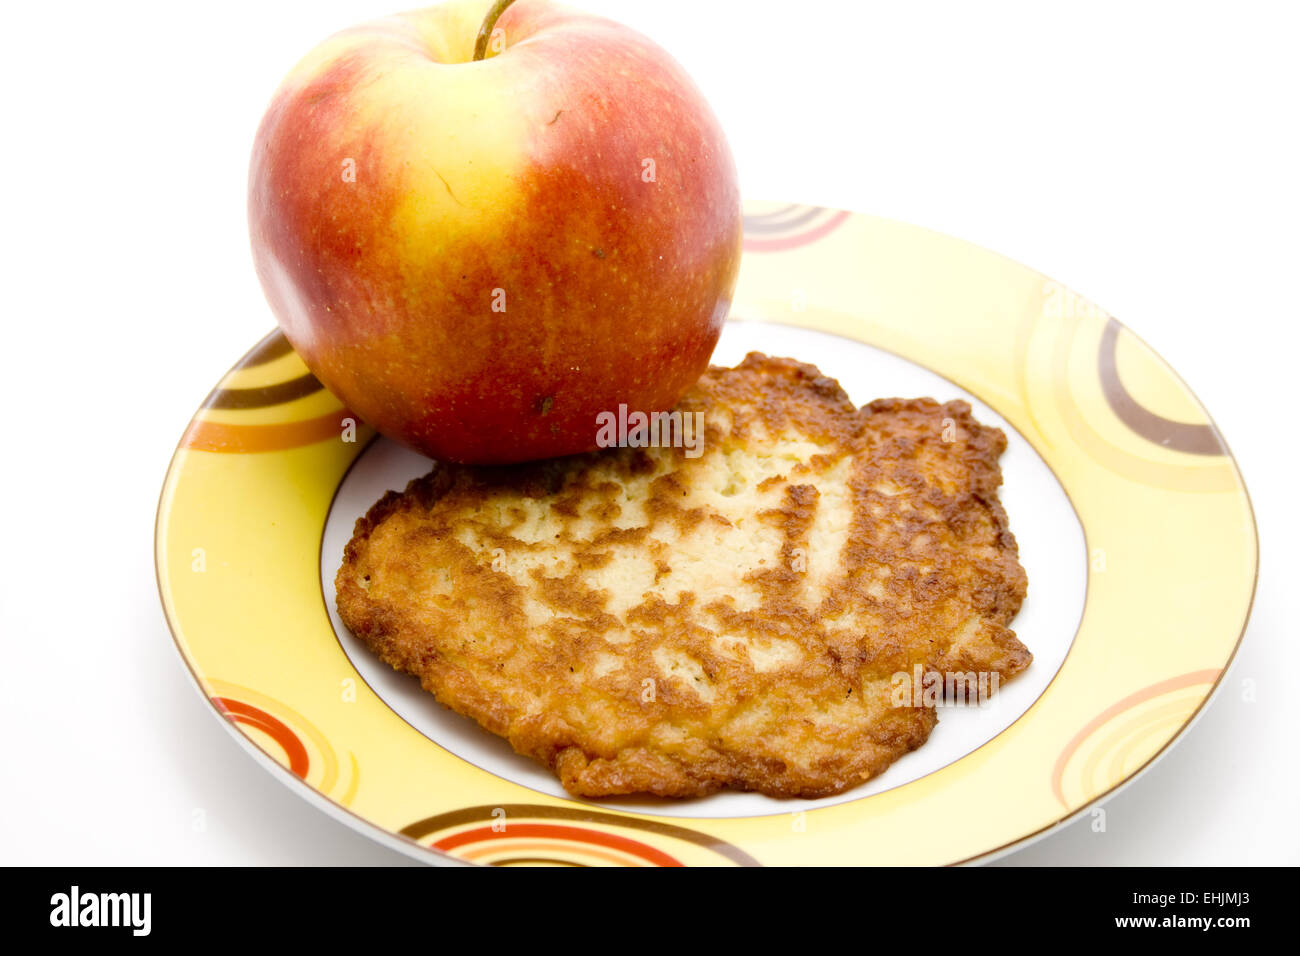 Apple and fried mashed potatoes Stock Photo